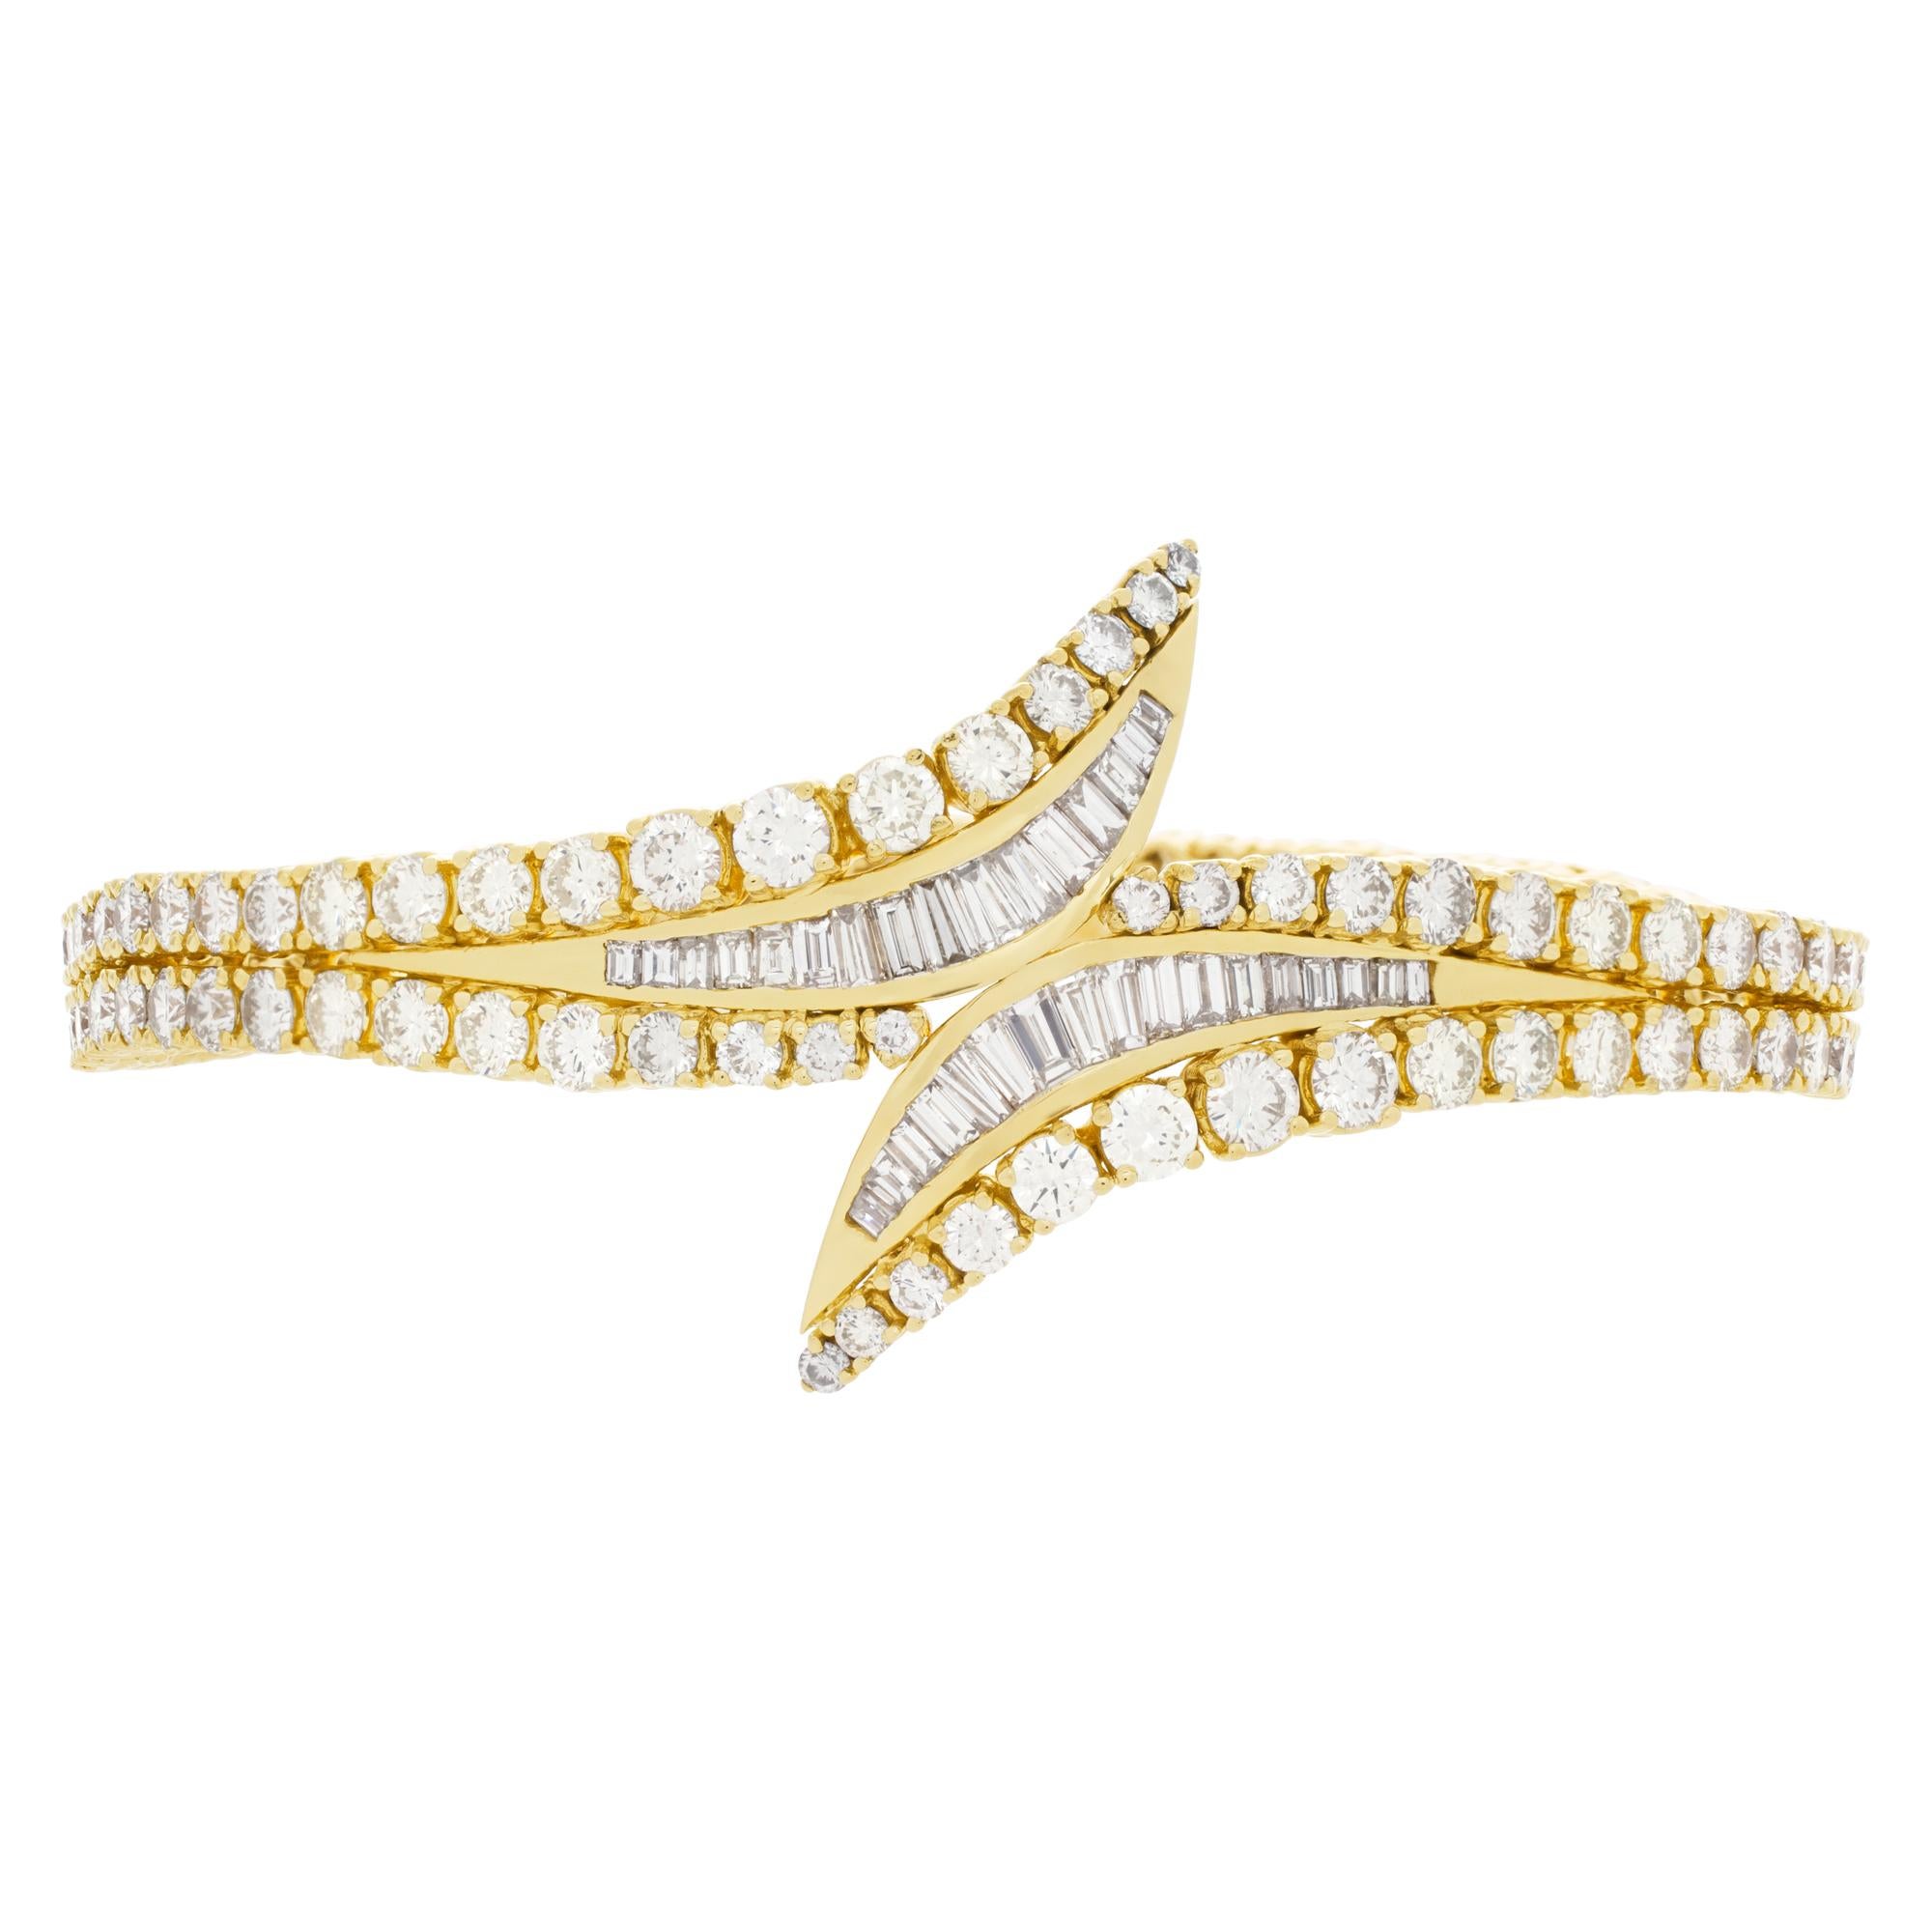 Bracelet in 18k Yellow Gold with over 9 Carats in Round Brilliant Cut Diamonds For Sale 3